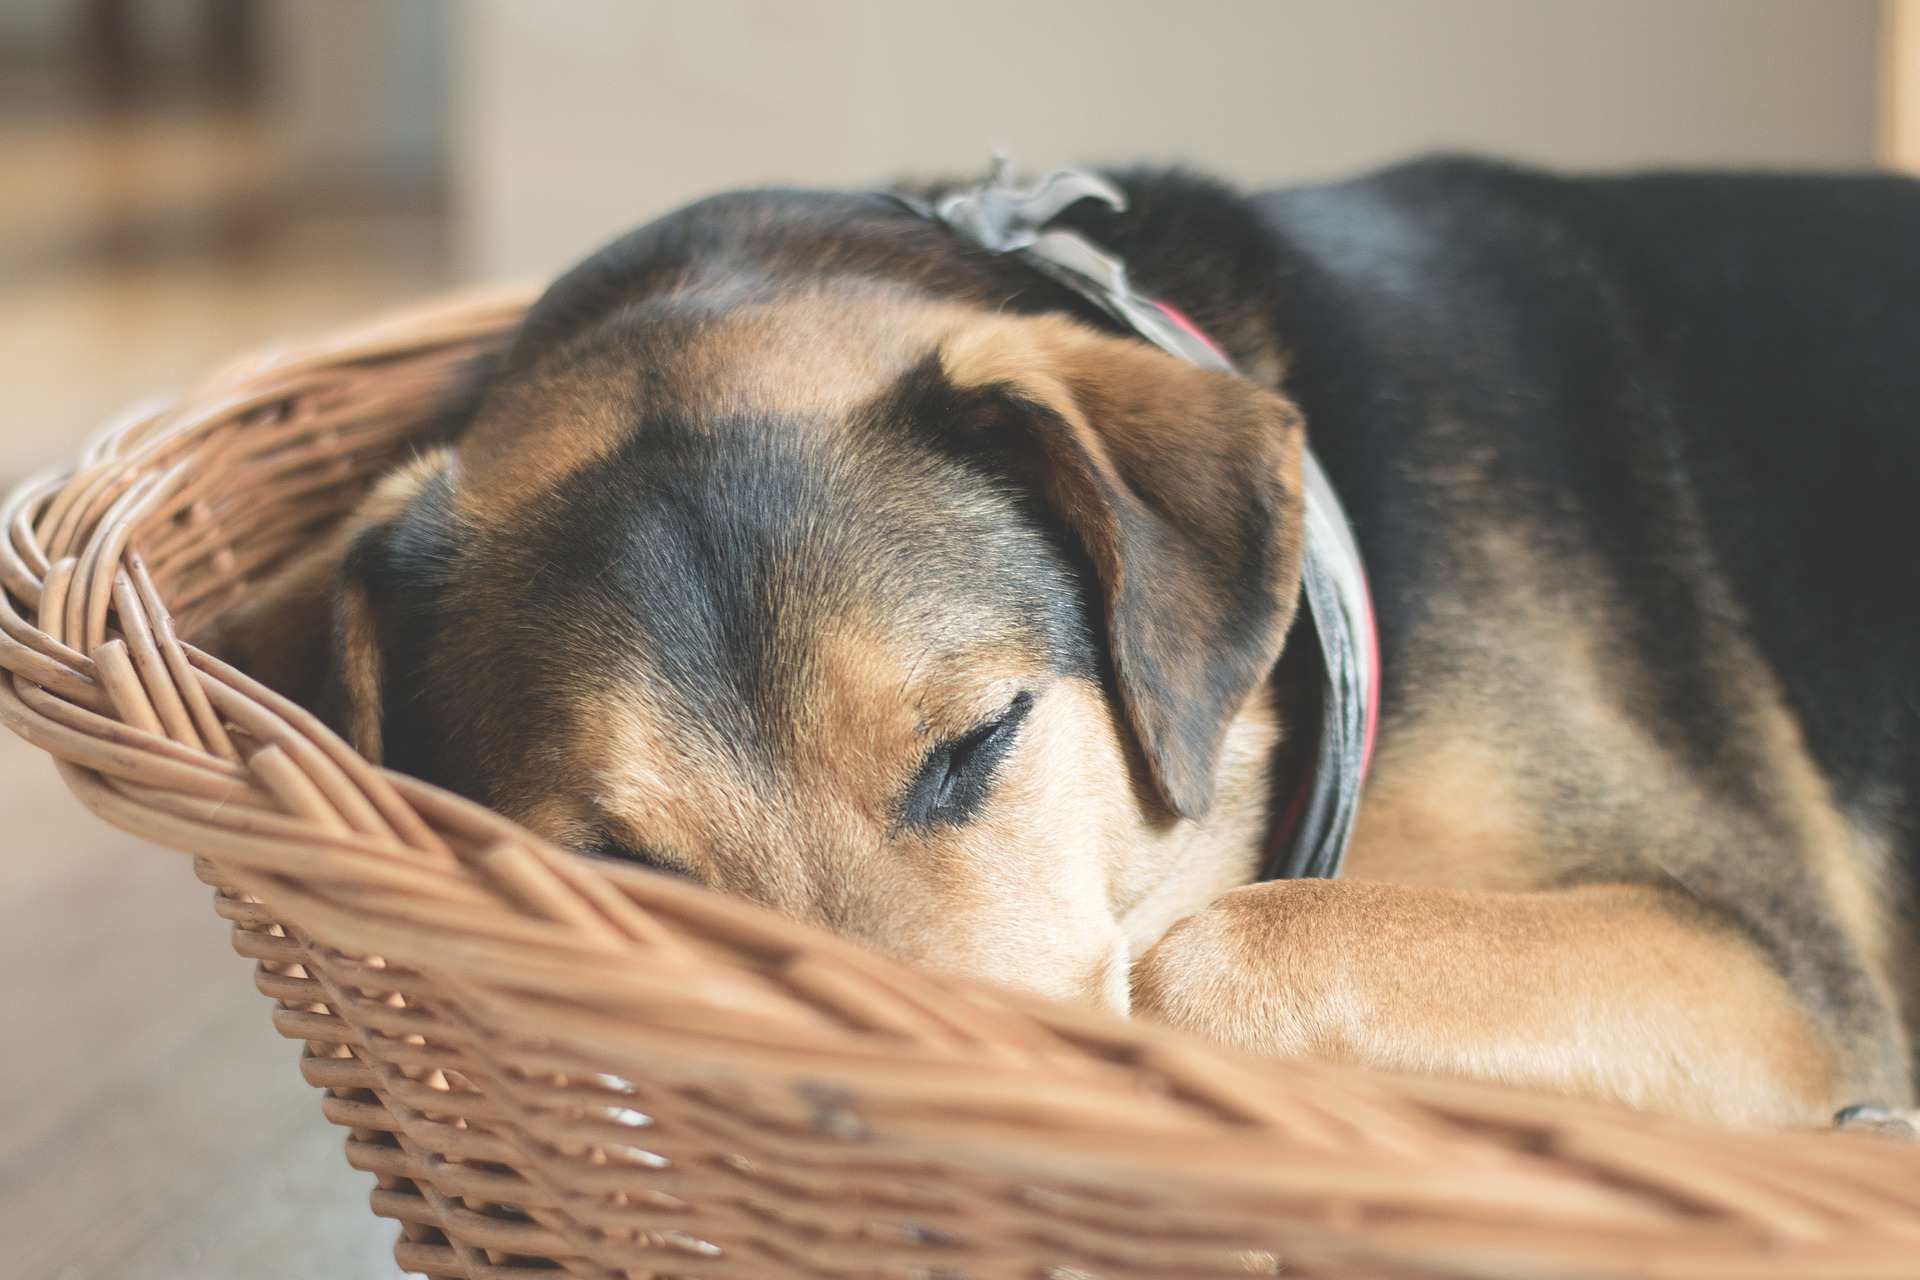 Dog curled up sleeping in a basket